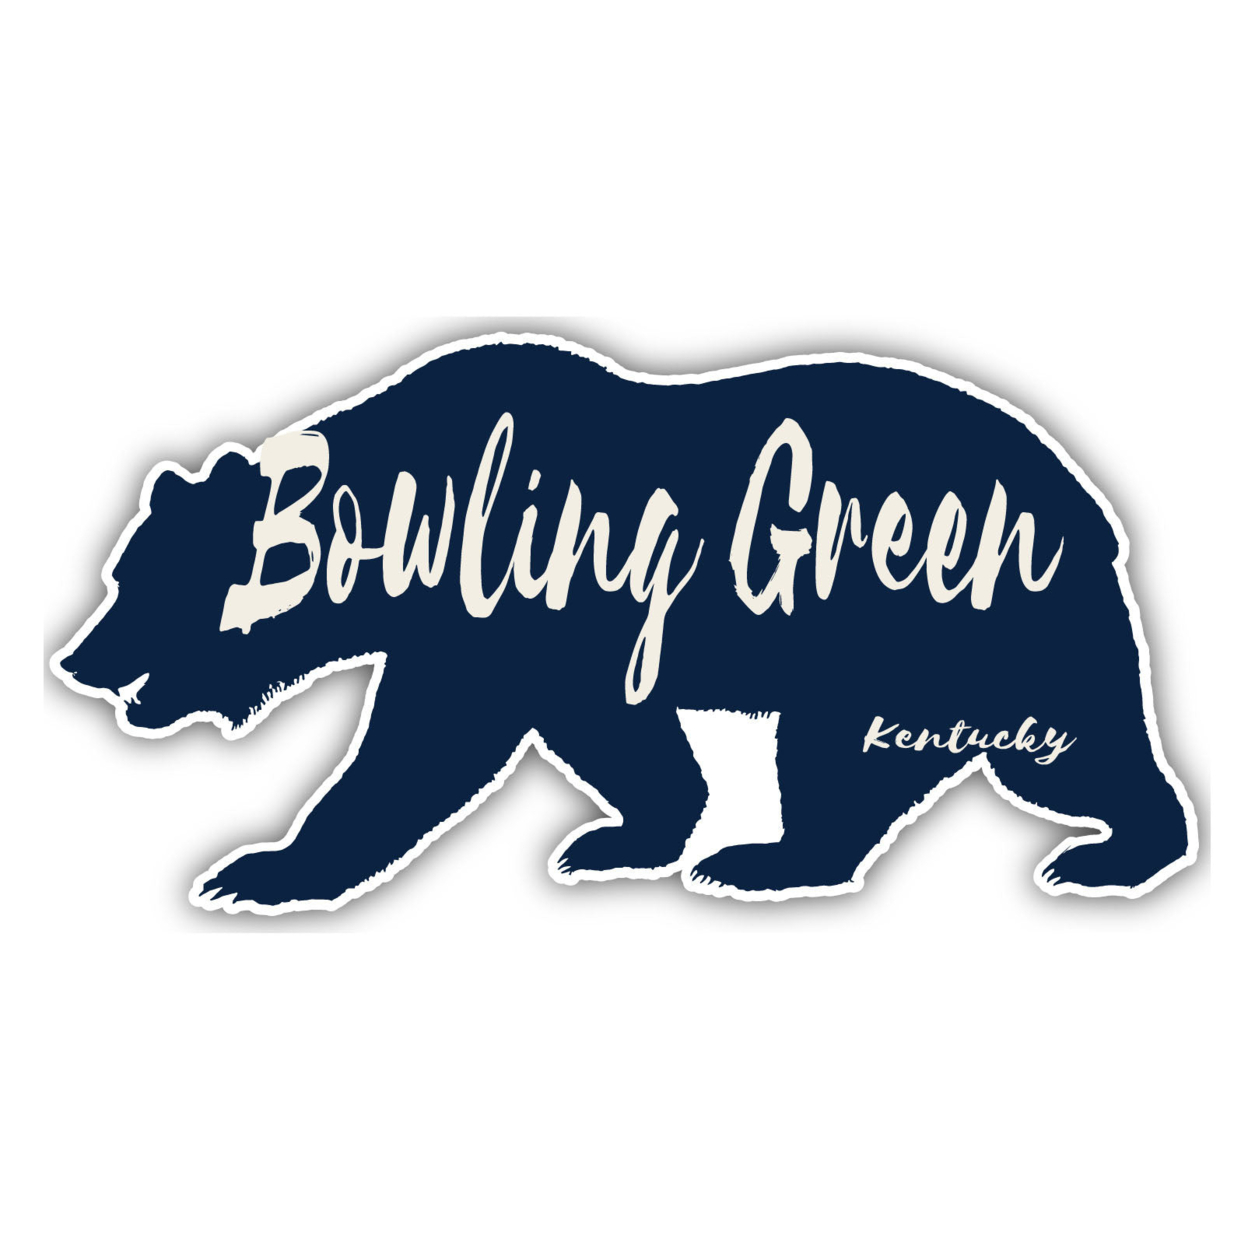 Bowling Green Kentucky Souvenir Decorative Stickers (Choose Theme And Size) - 4-Pack, 10-Inch, Bear